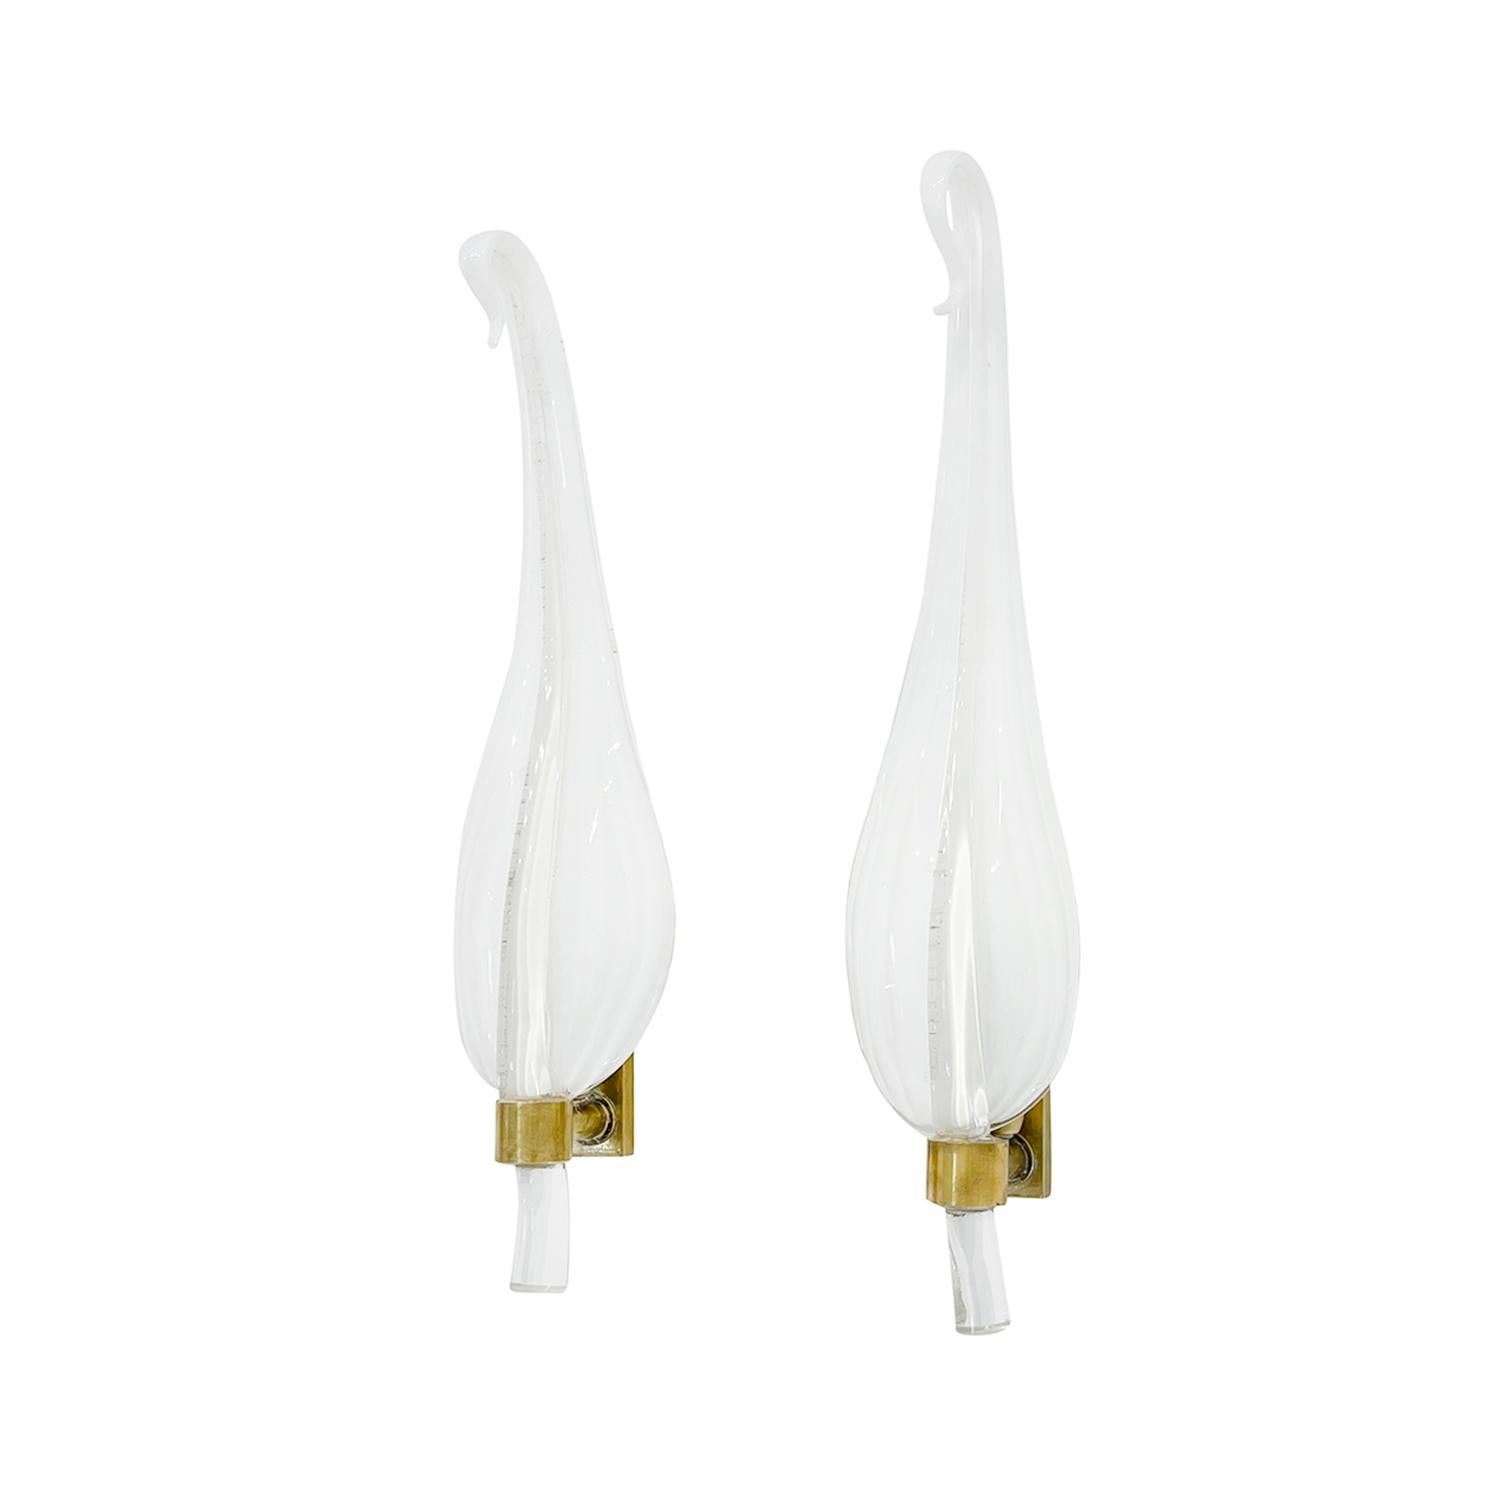 A slim, vintage Mid-Century Modern Italian pair of wall sconces made of hand blown Murano glass Sommerso with a polished brass stripped ring, imitating a feather. Each of the appliques features one light socket, in good condition. The wires have